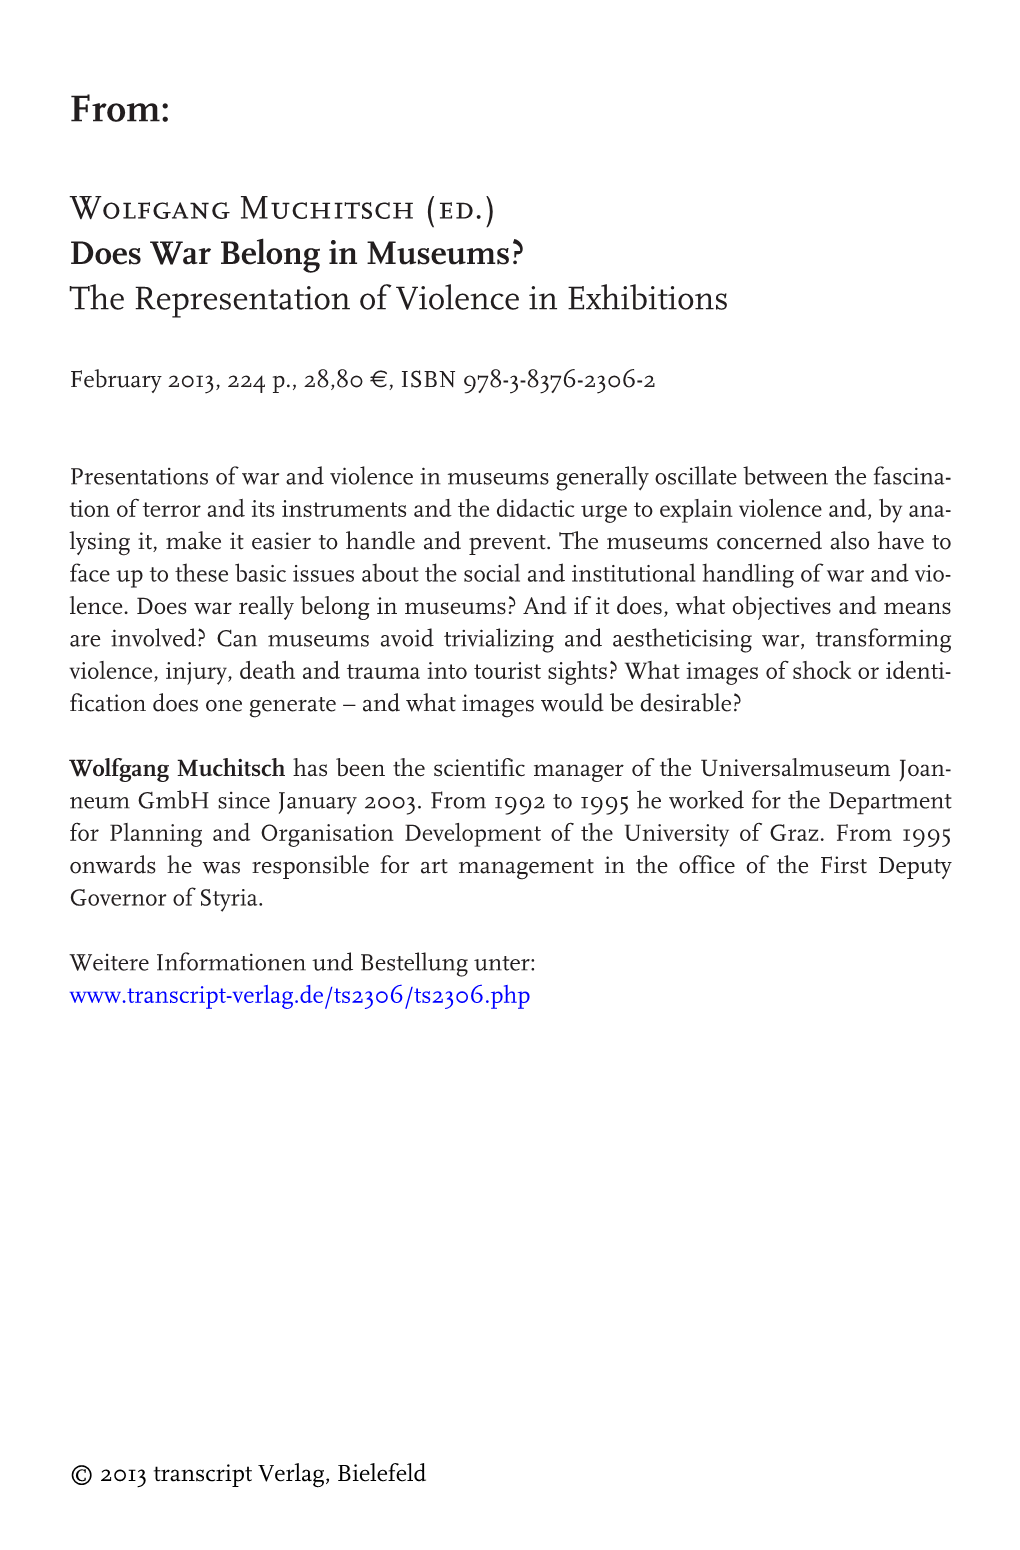 Wolfgang Muchitsch (Ed.) Does War Belong in Museums? the Representation of Violence in Exhibitions